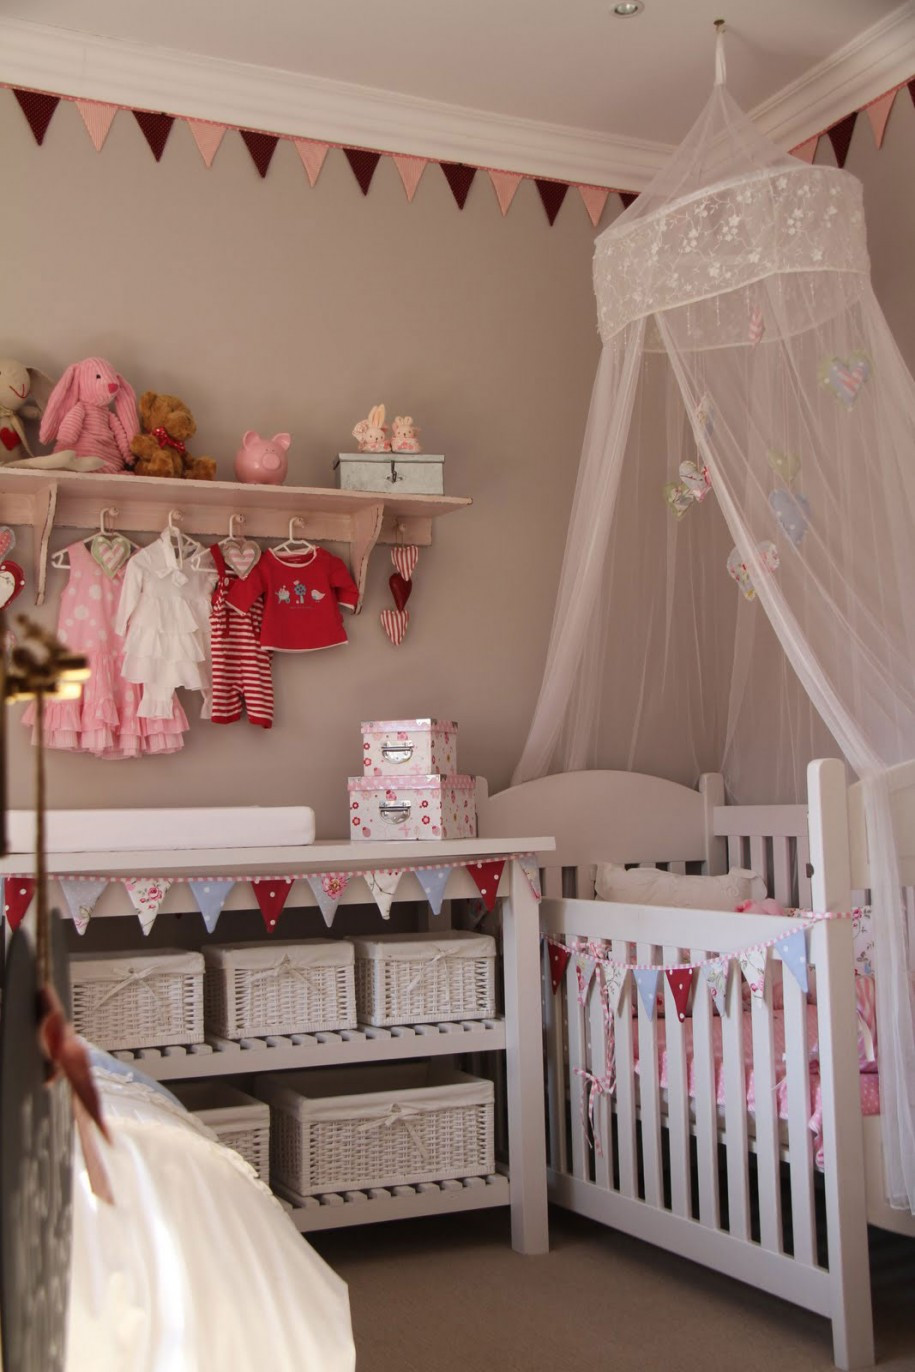 DIY Baby Room Decoration
 Antique Baby Room Ideas Designed for Modern House